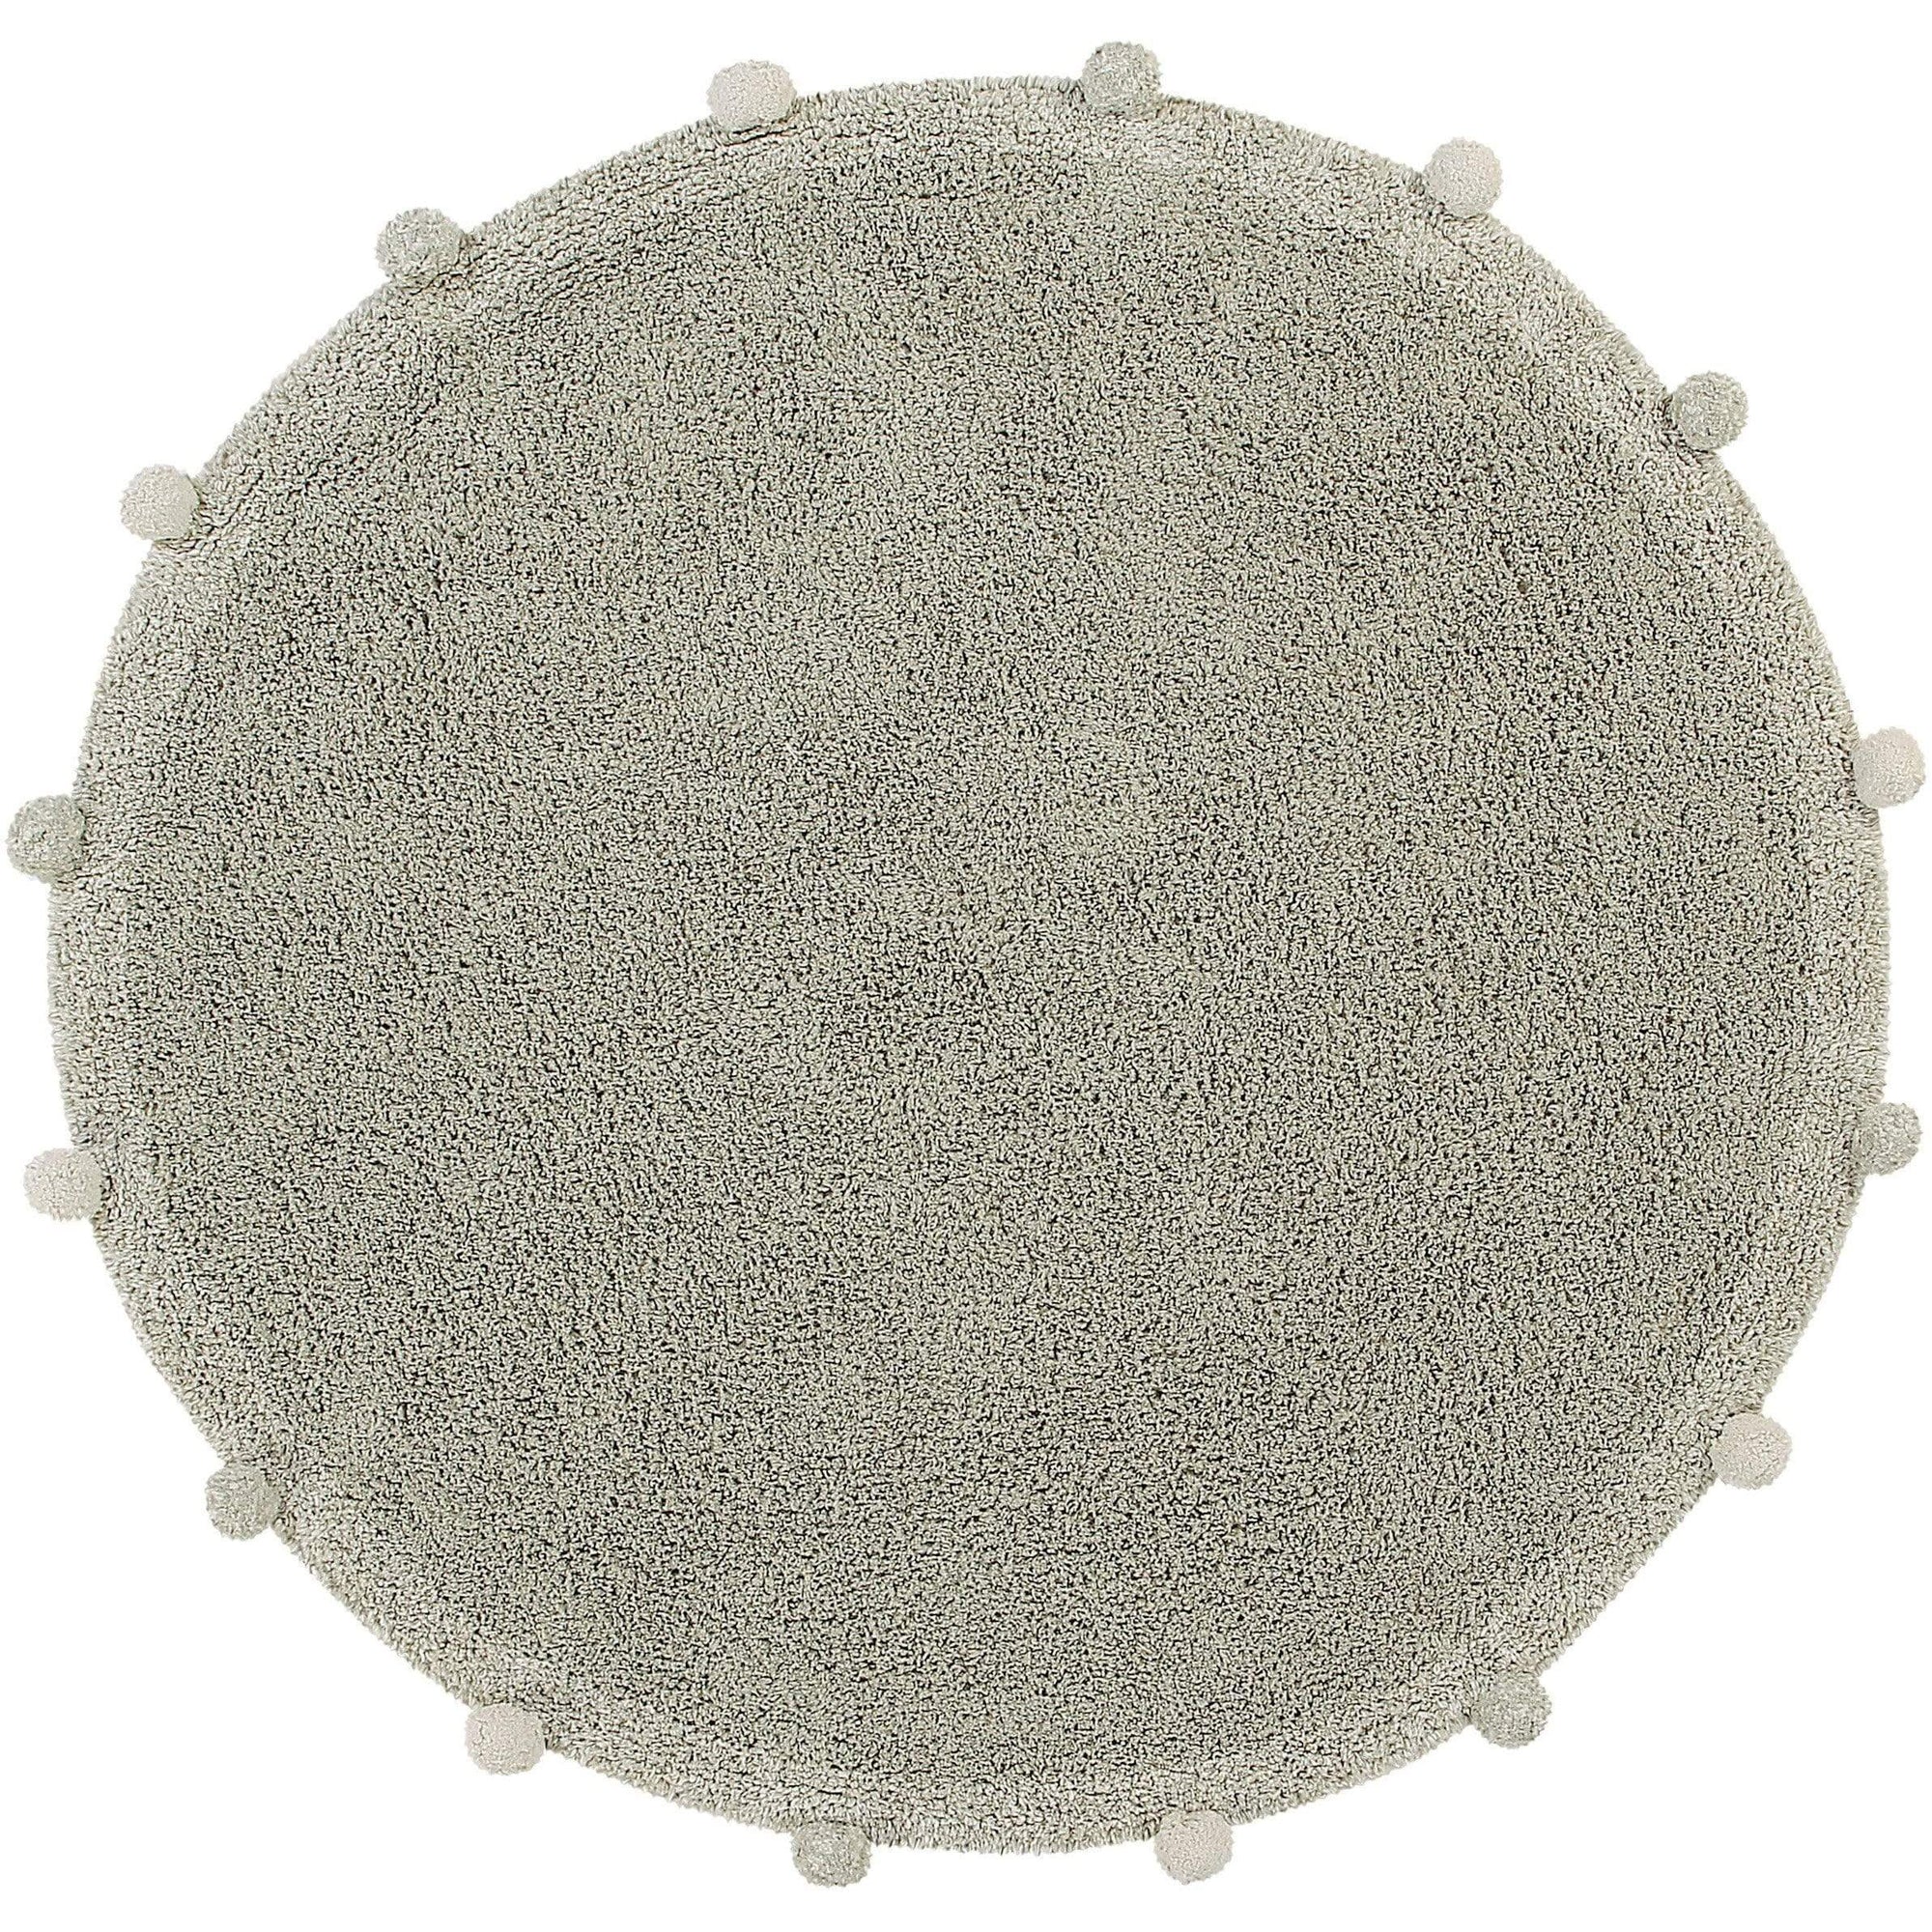 Rugs by Roo | Lorena Canals Bubbly Natural Olive Washable Area Rug-C-BUBBLY-OLV